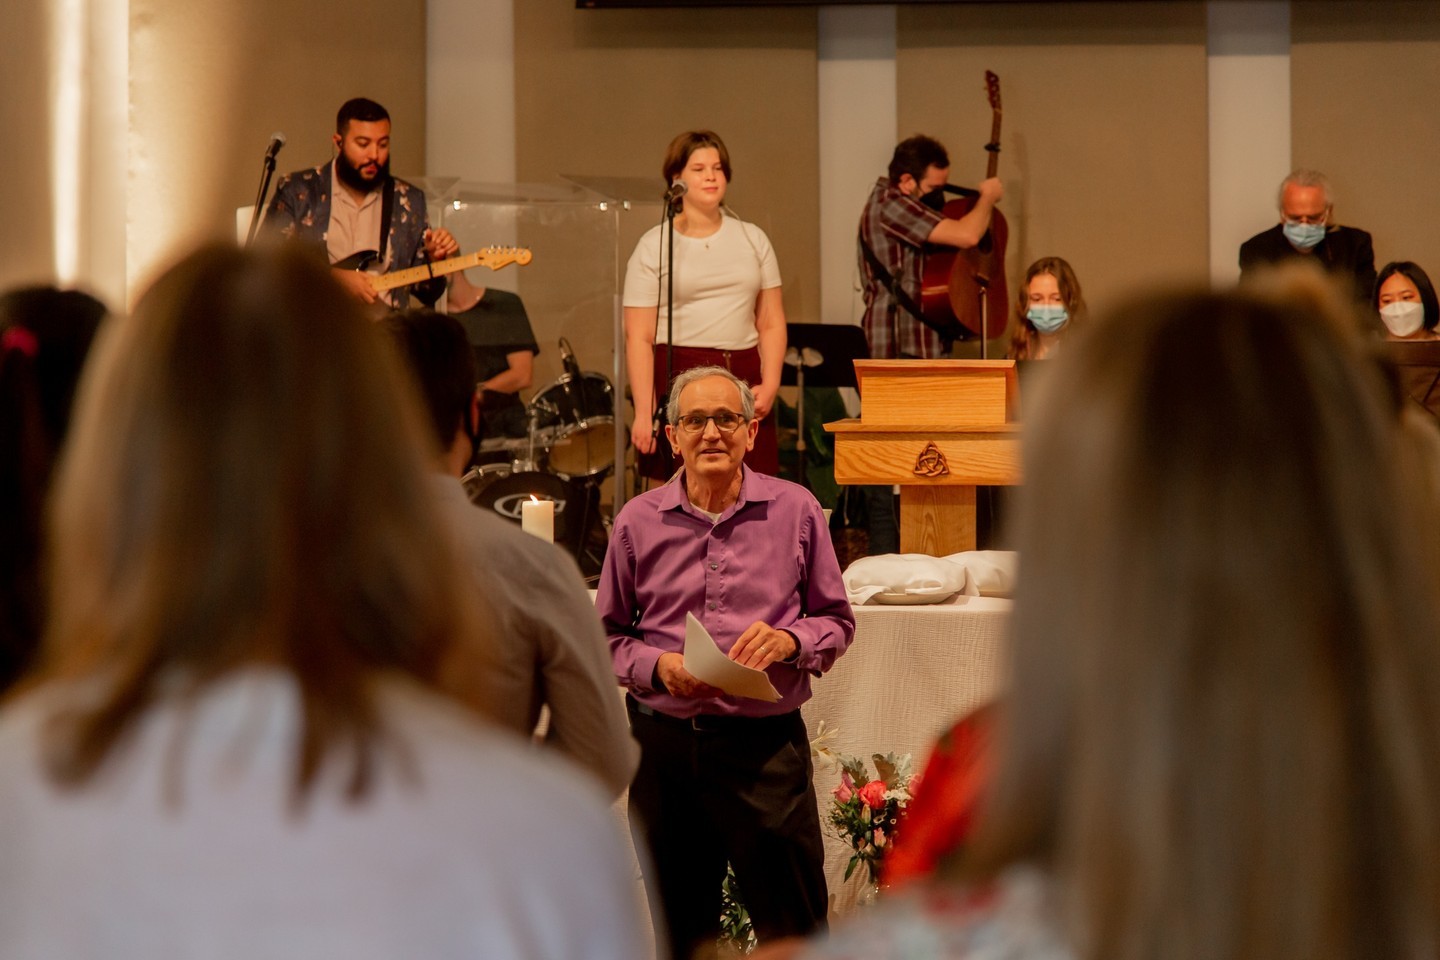 It's #Thursdayserveday! This week, we're featuring another worship ministry role, the liturgist (picture here featuring the wonderful George Howard). If you have felt called to participate in worship through reading scripture, leading the prayers of the people and communion please connect with Troi@eastsideatl.org to learn more.